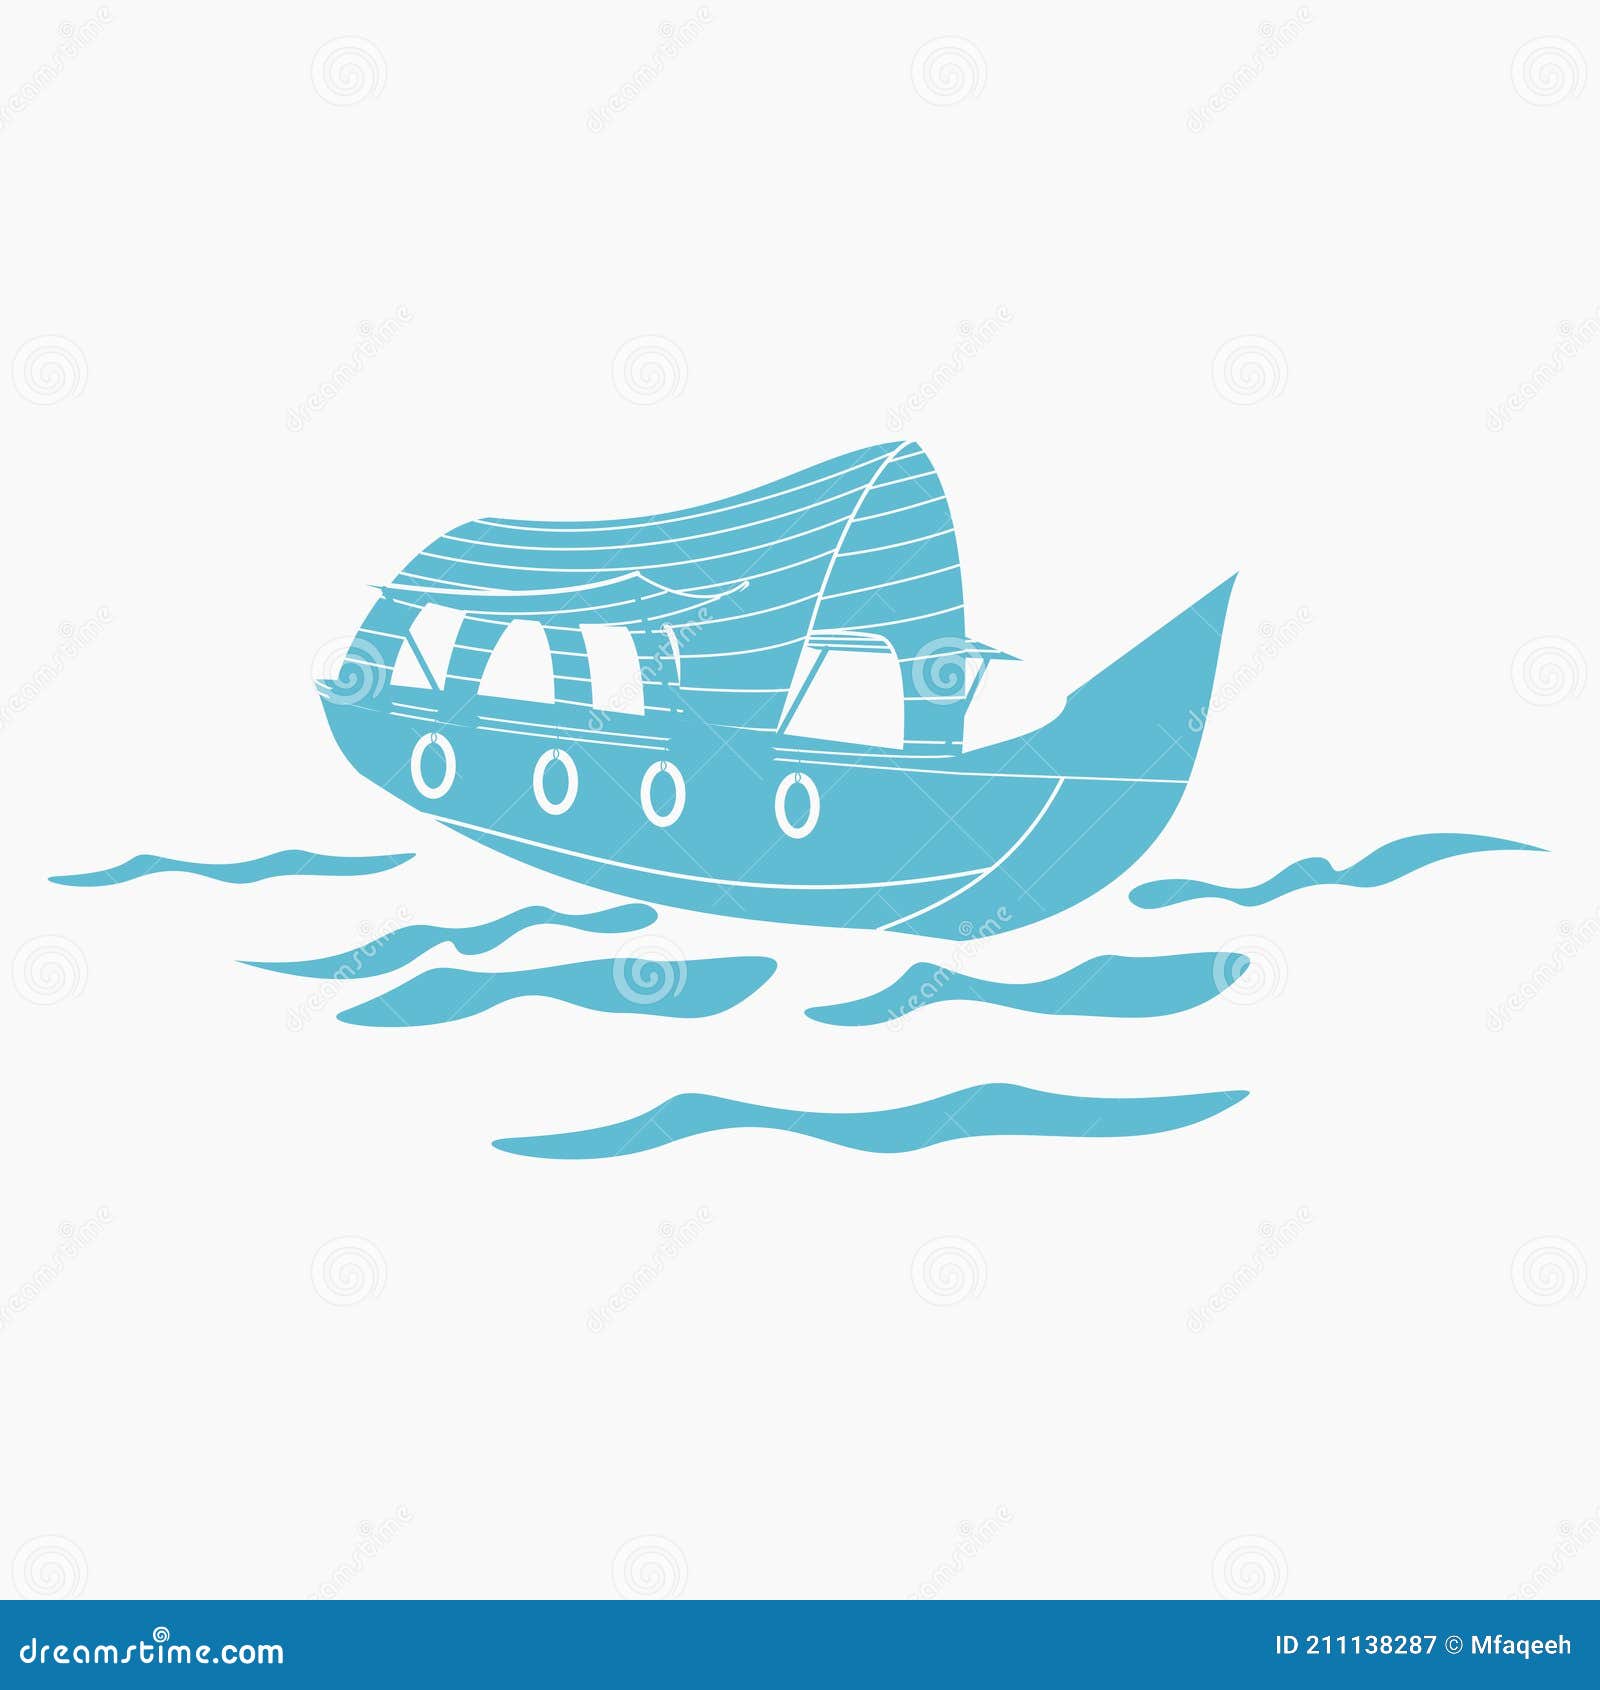 778,326 House Boat Images, Stock Photos & Vectors | Shutterstock